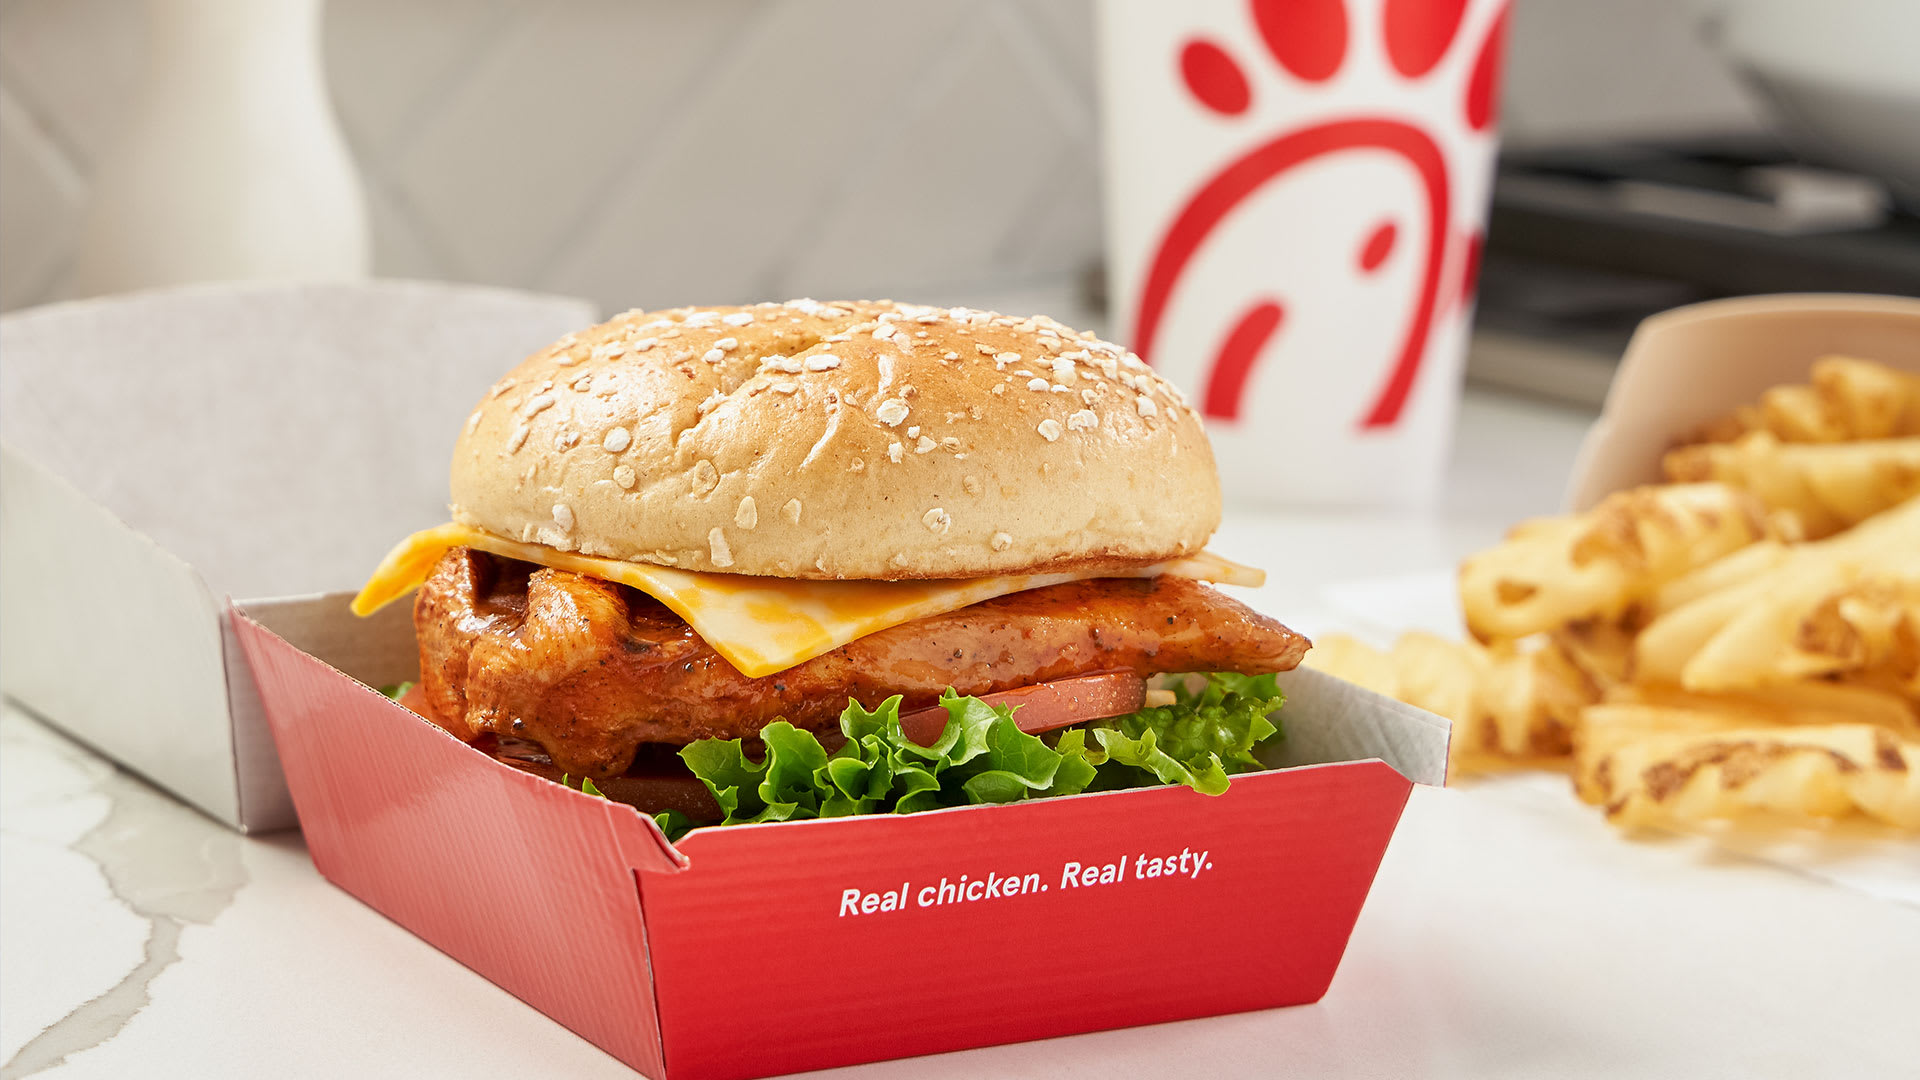 Chick-fil-A brings back the Grilled Spicy Deluxe and announces a new Autumn Spice Milkshake!